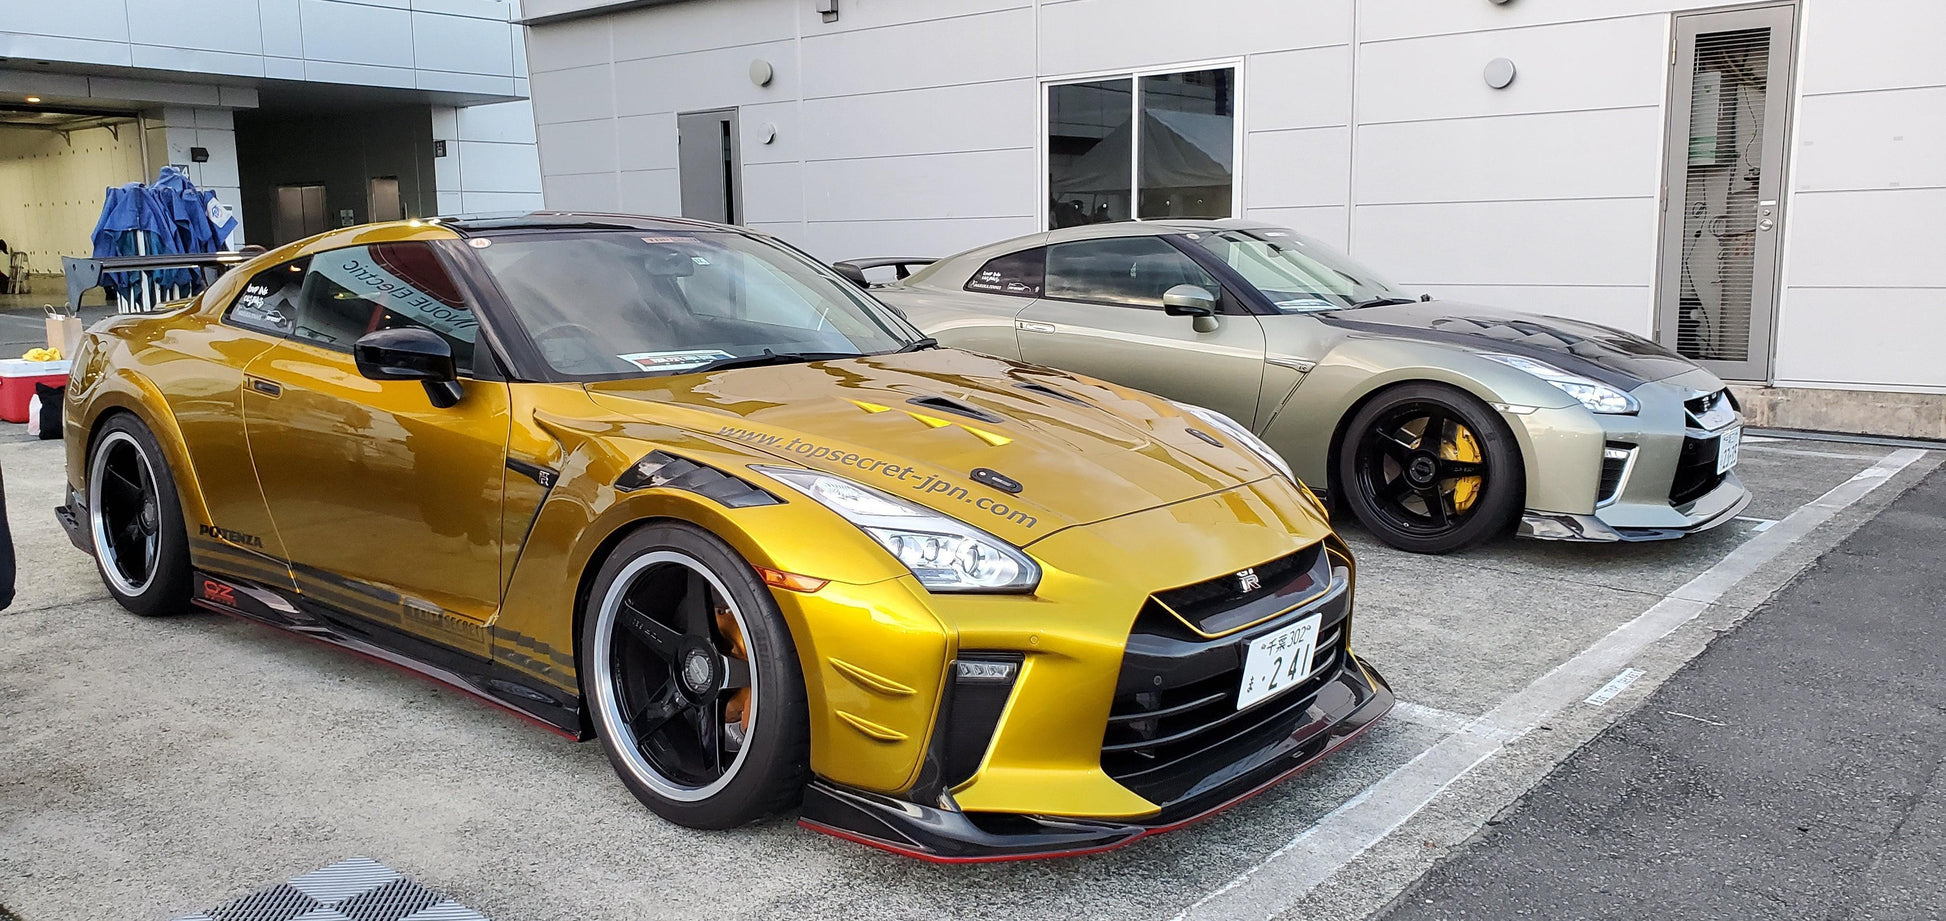 Nismo Festival - Special event 12 hour experience! - JDM Global Warehouse